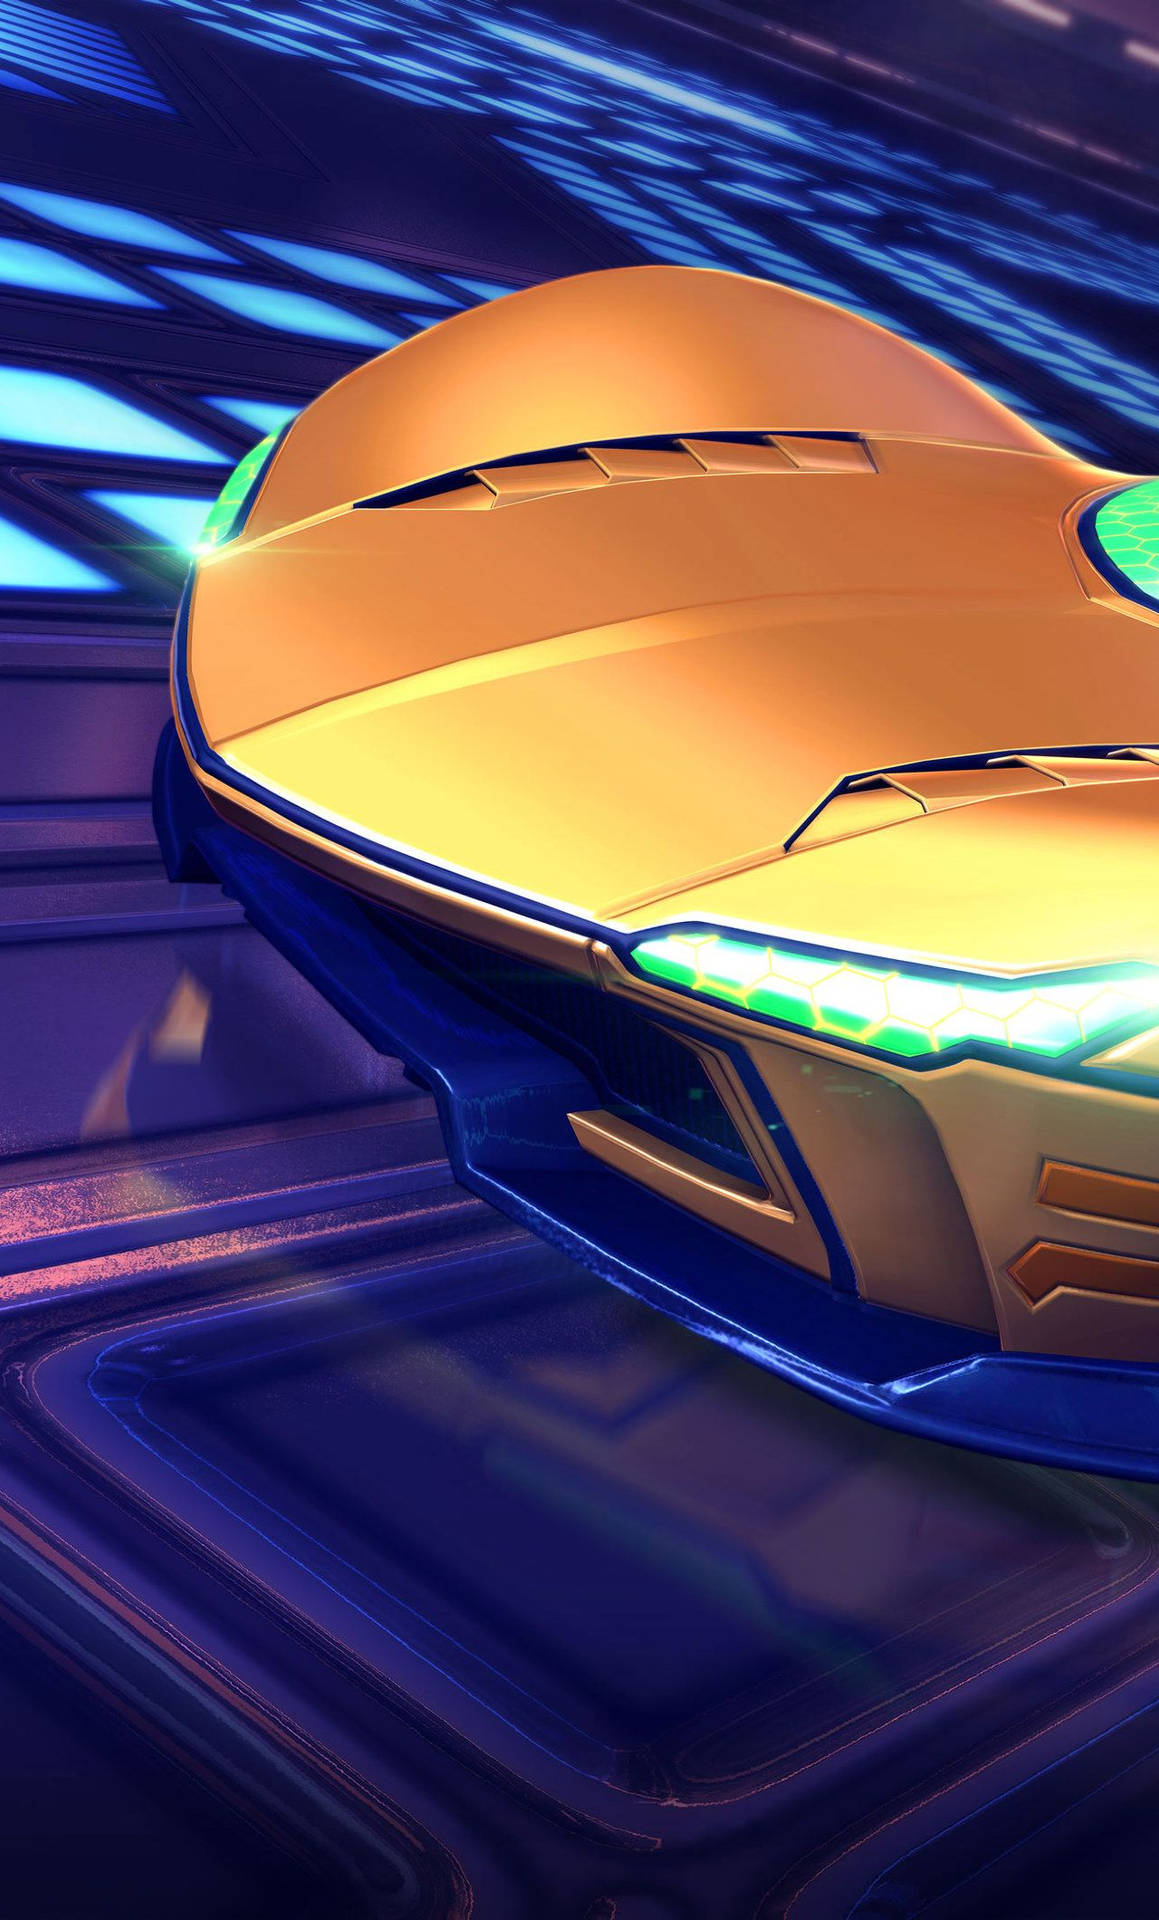 Get your game on with Rocket League Phone Wallpaper